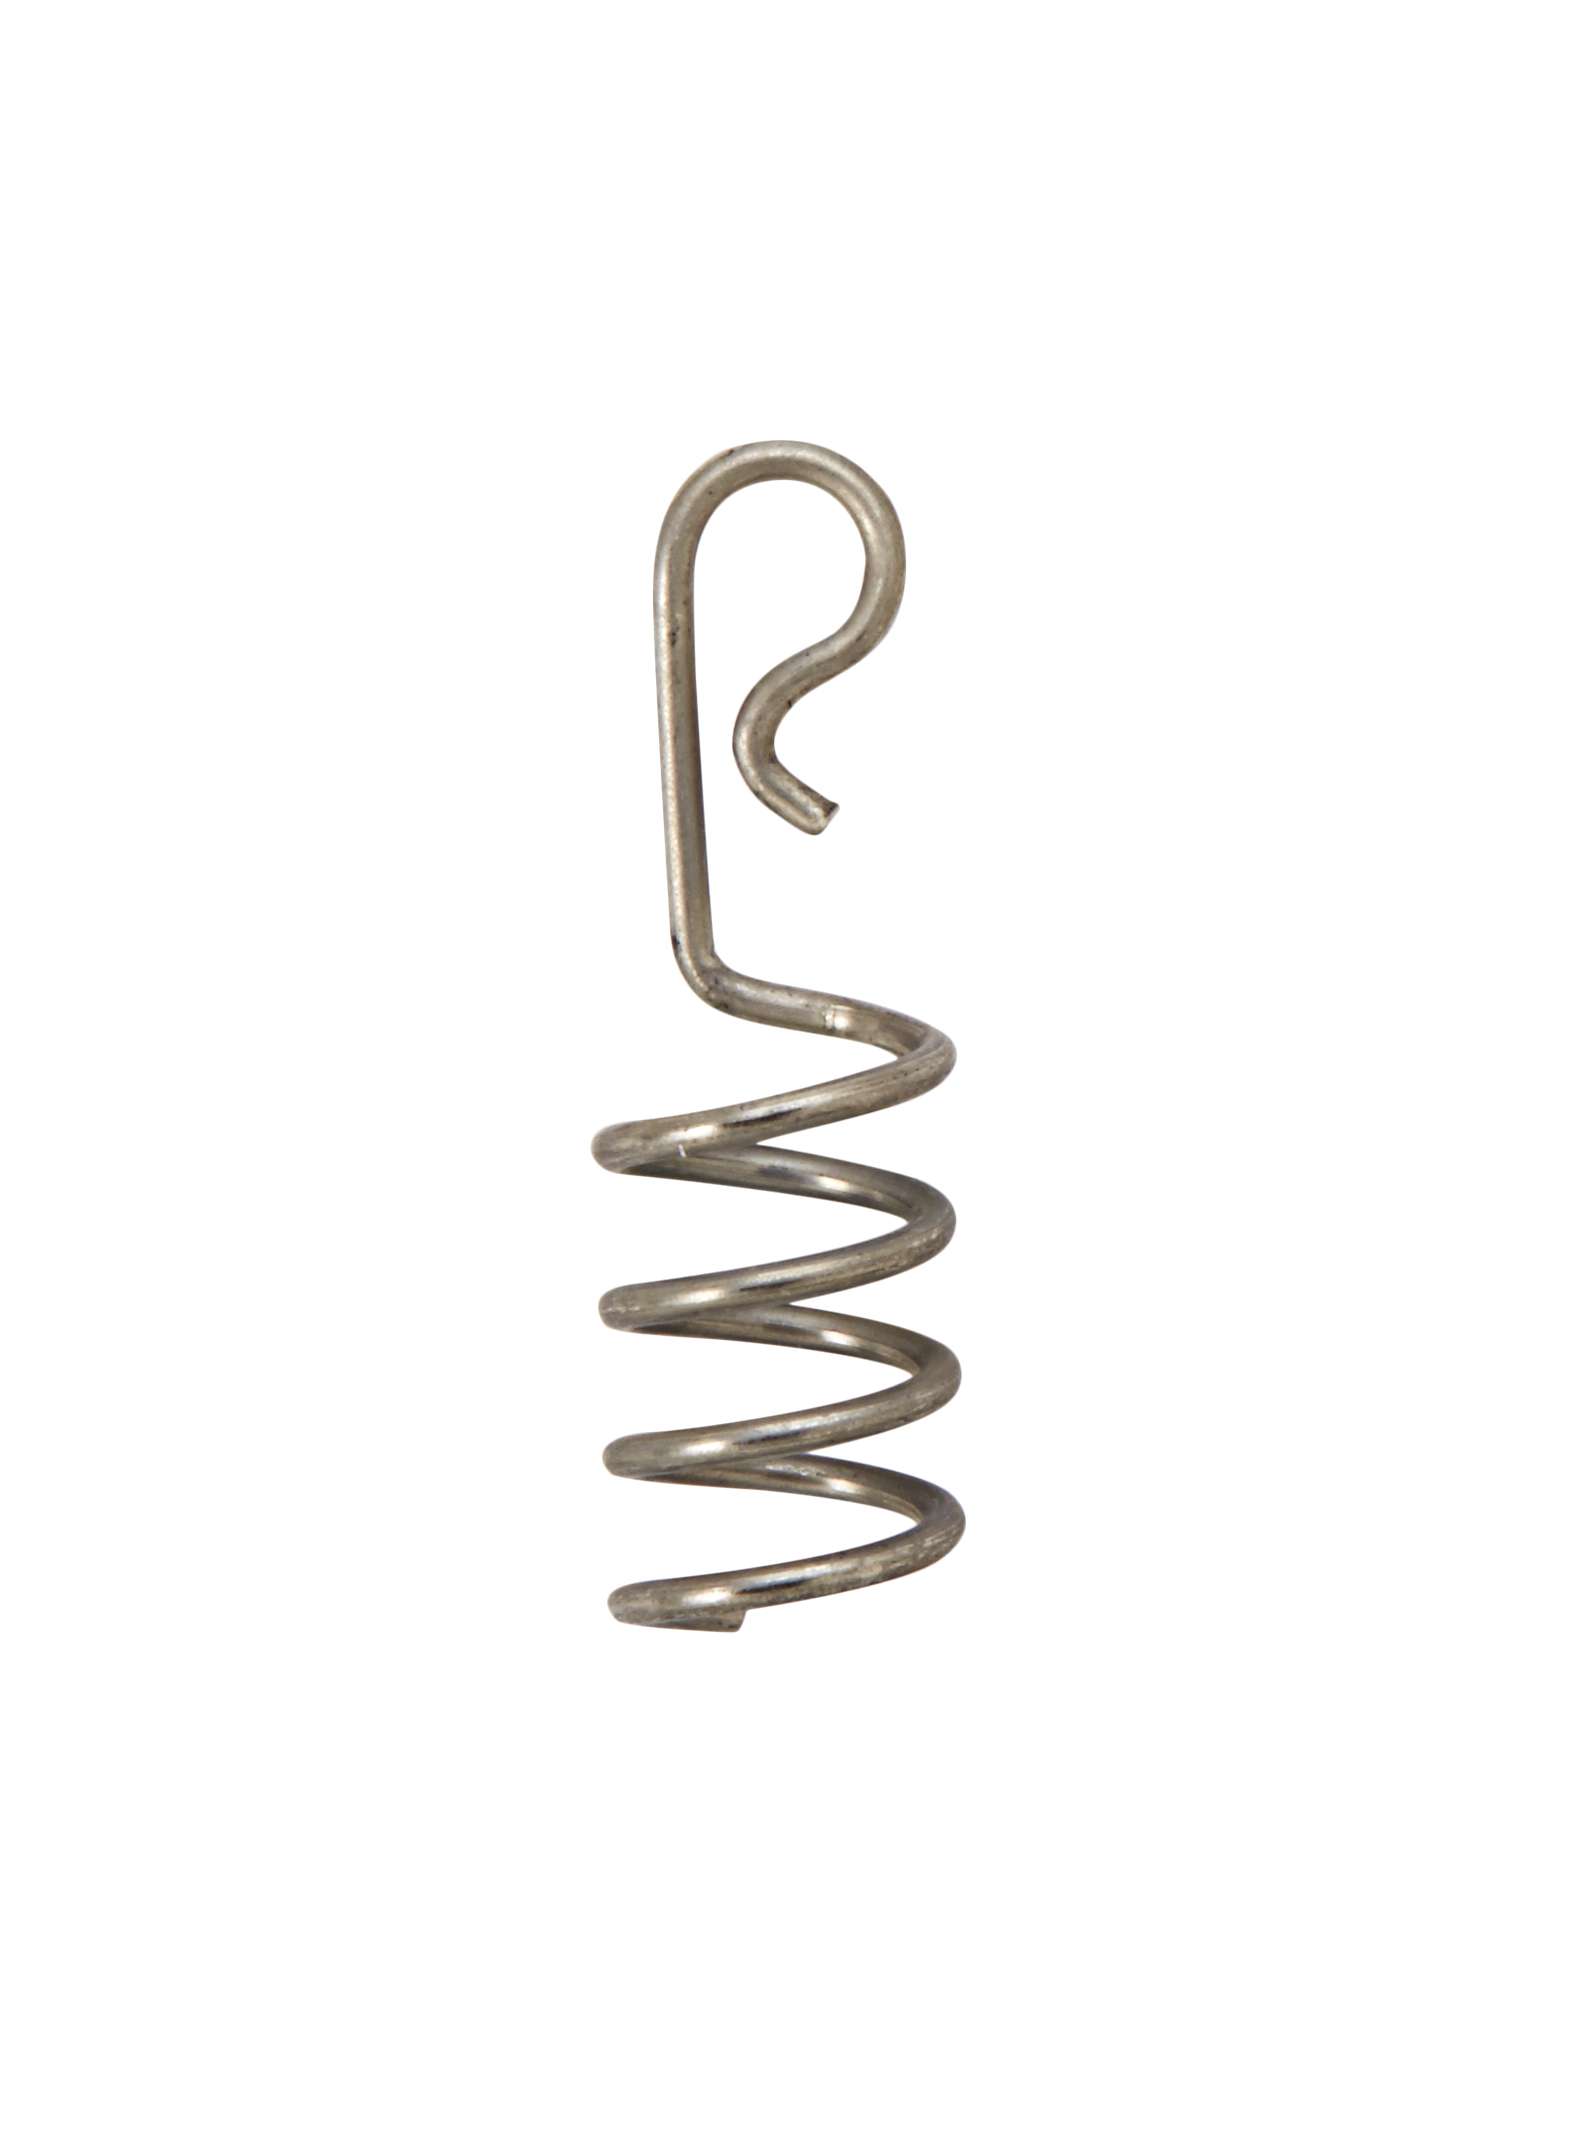 <b>Eagle Claw</b><br>	LSPRING<br>			Turn any hook into a soft-plastic hook with the help of this soft-bait spring. Attach the spring through the eye of almost any hook, and it is transformed into a hook to go after large game fish with a free-moving, realistic soft-plastic. Made with stainless steel, these springs are quick and easy to use, fit a variety of hooks and are available in three sizes.